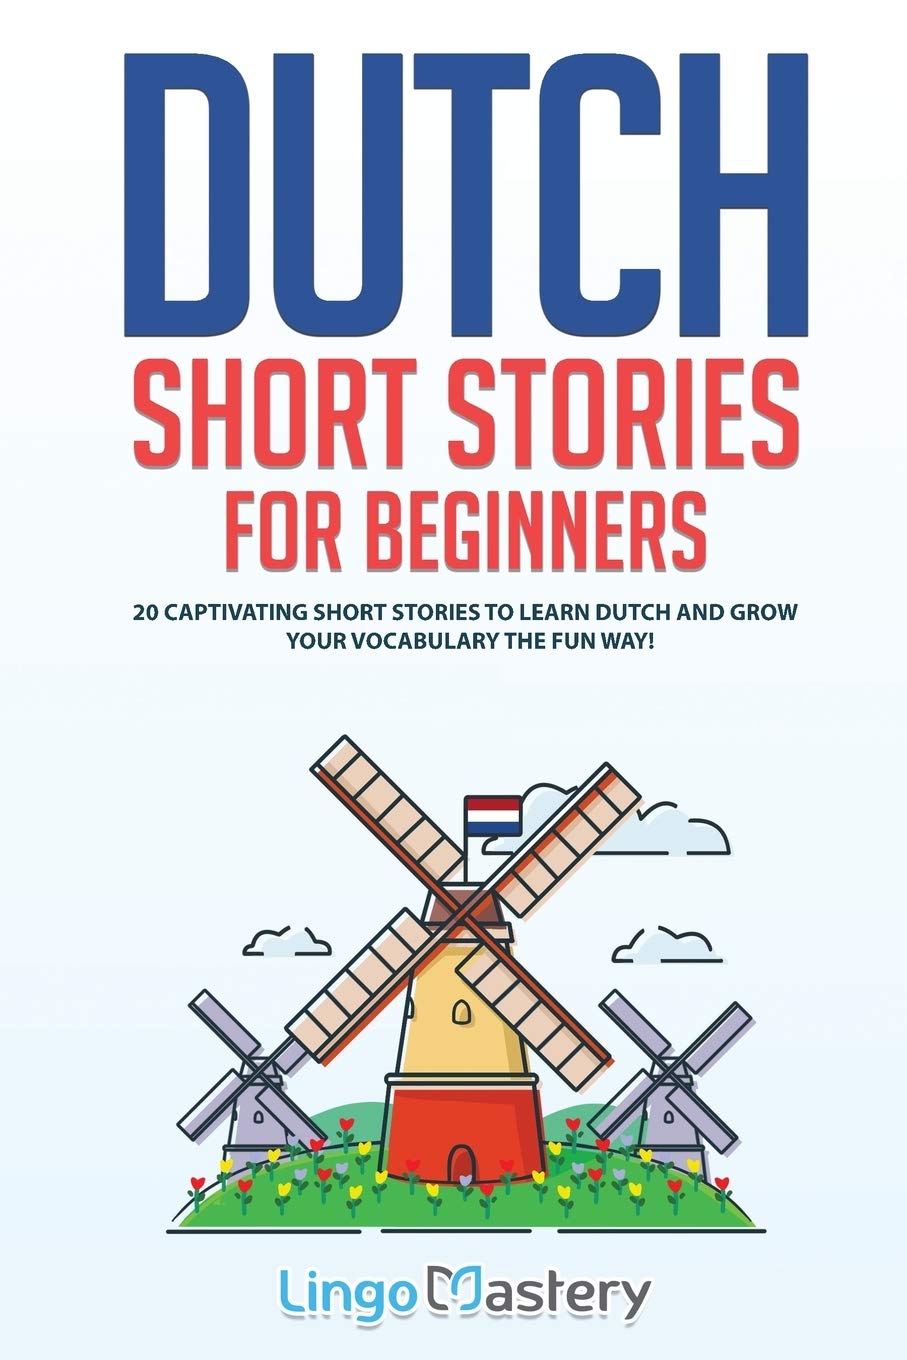 Dutch Short Stories for Beginners: 20 Captivating Short Stories to Learn Dutch & Grow Your Vocabulary the Fun Way! (Easy Dutch Stories)